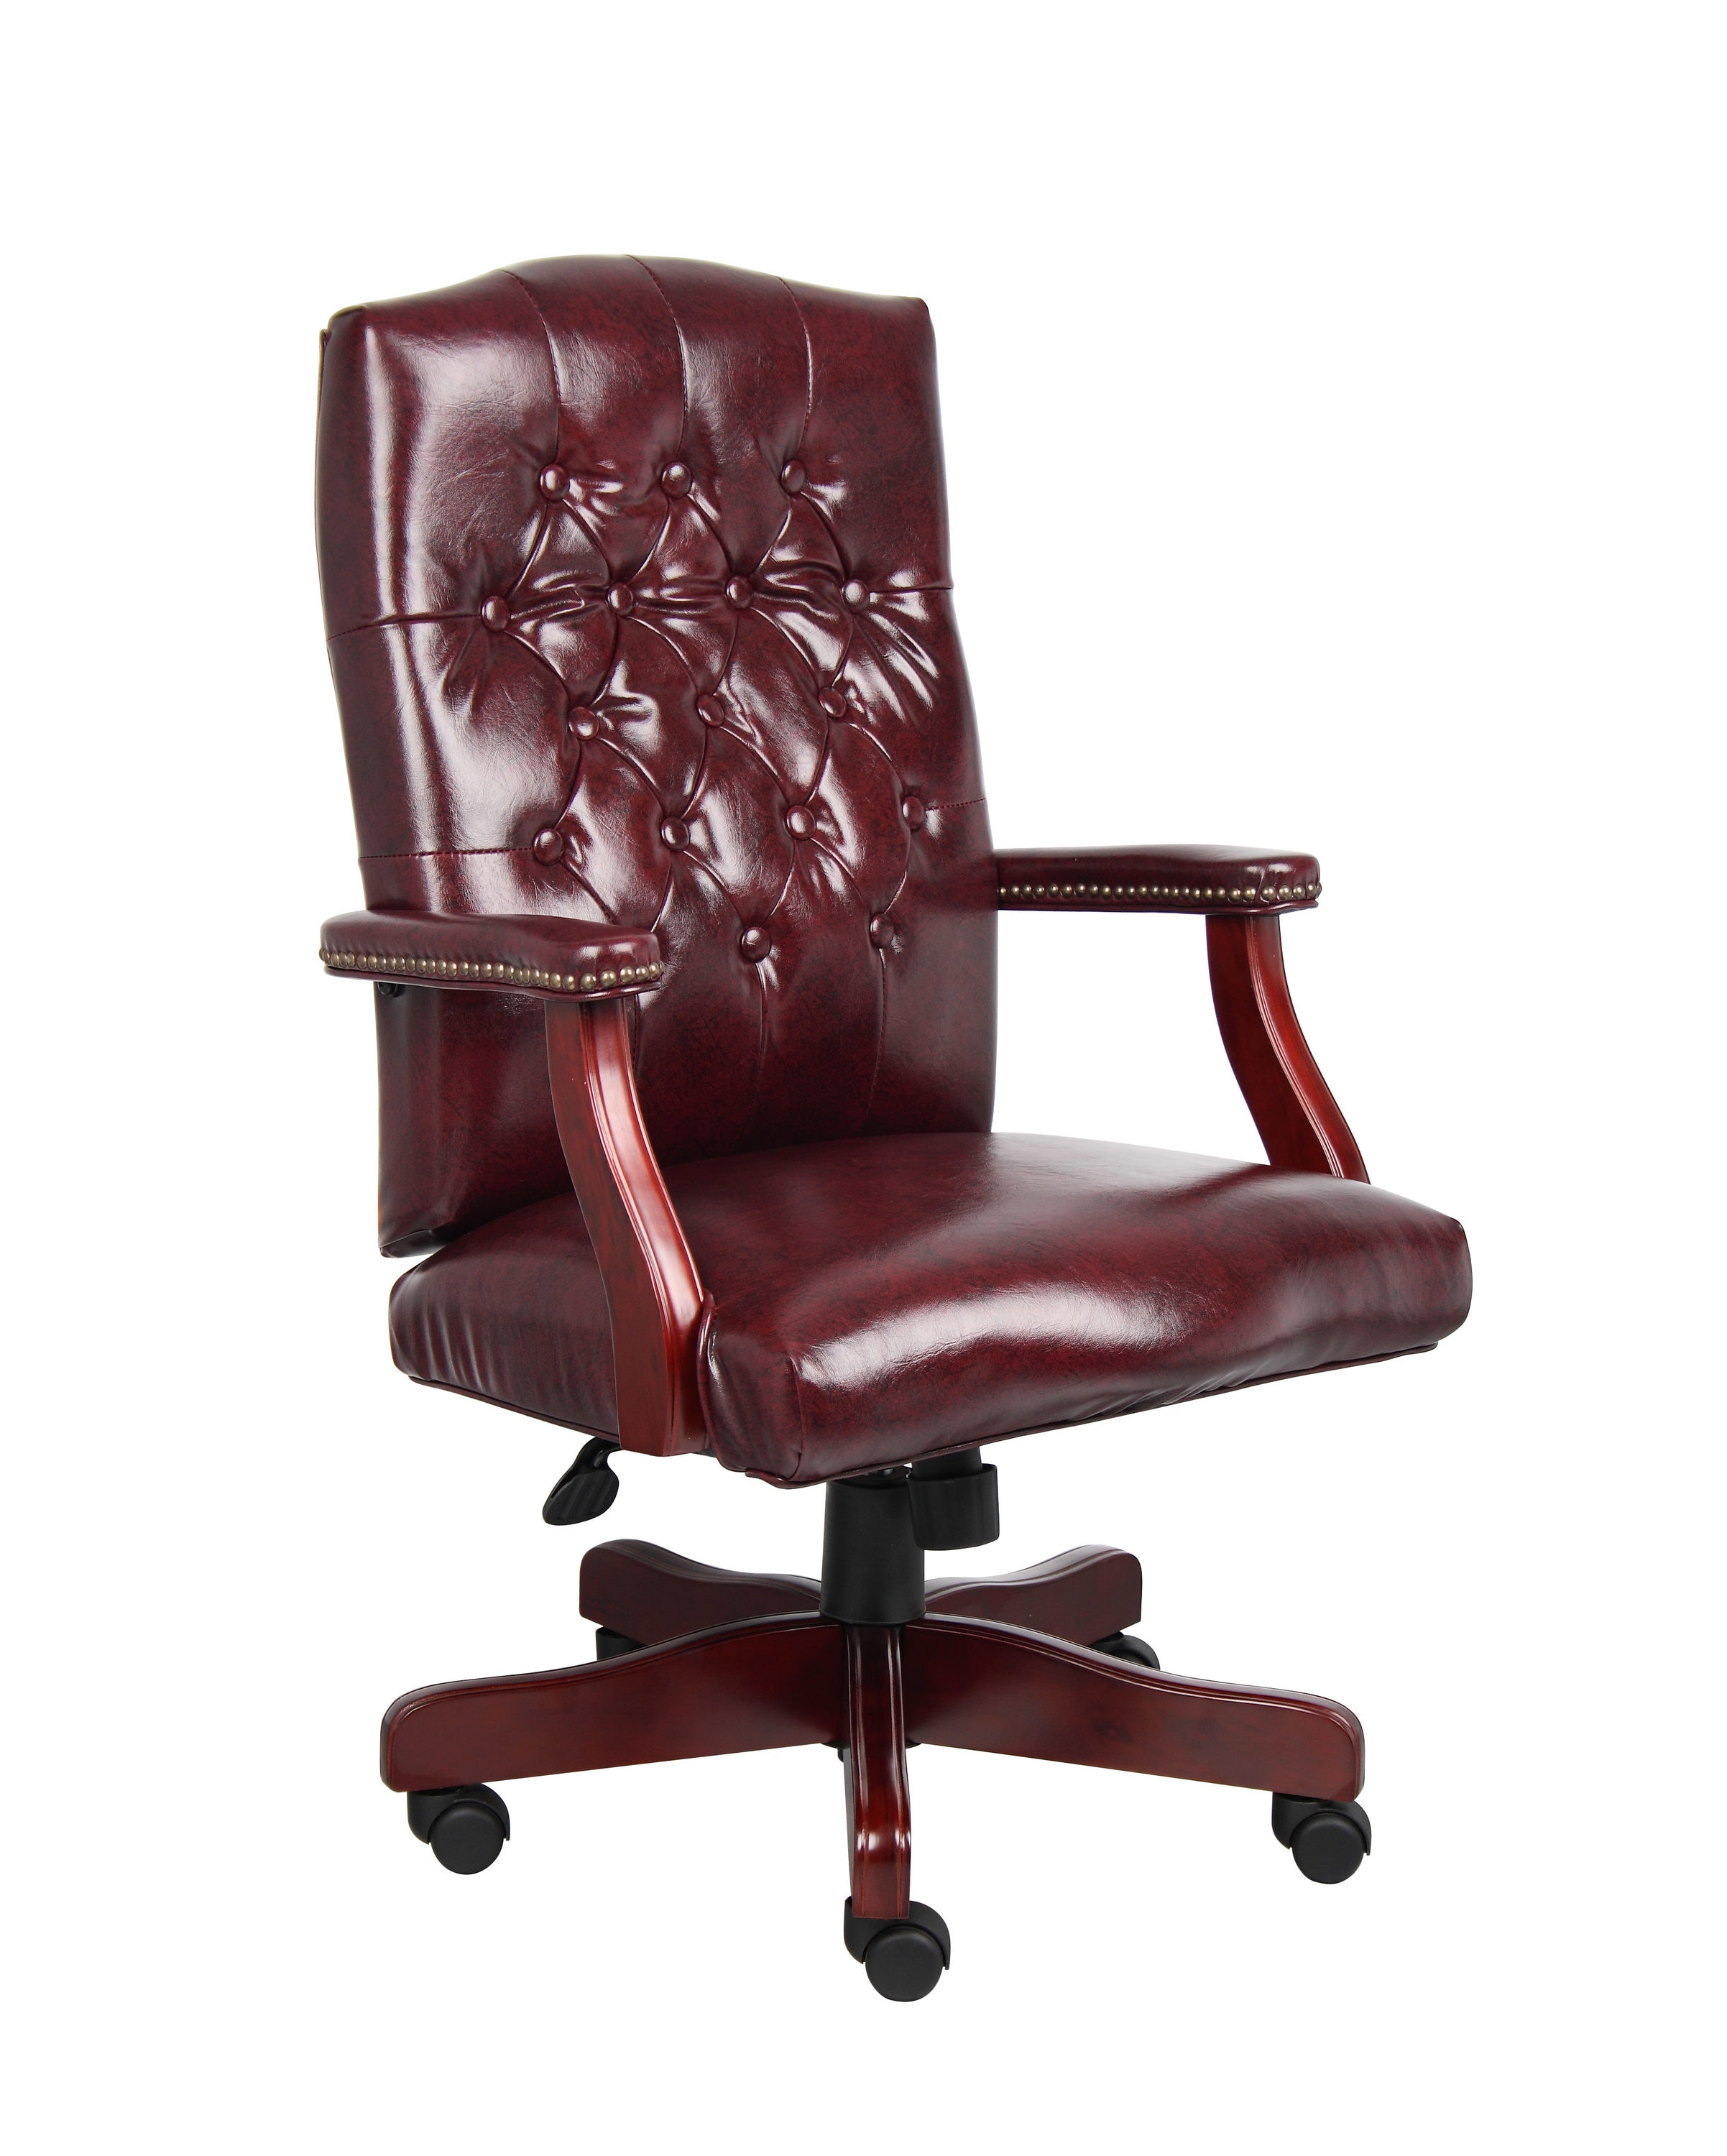 Boss Office Products Ivy League Executive Guest Chair Burgundy 